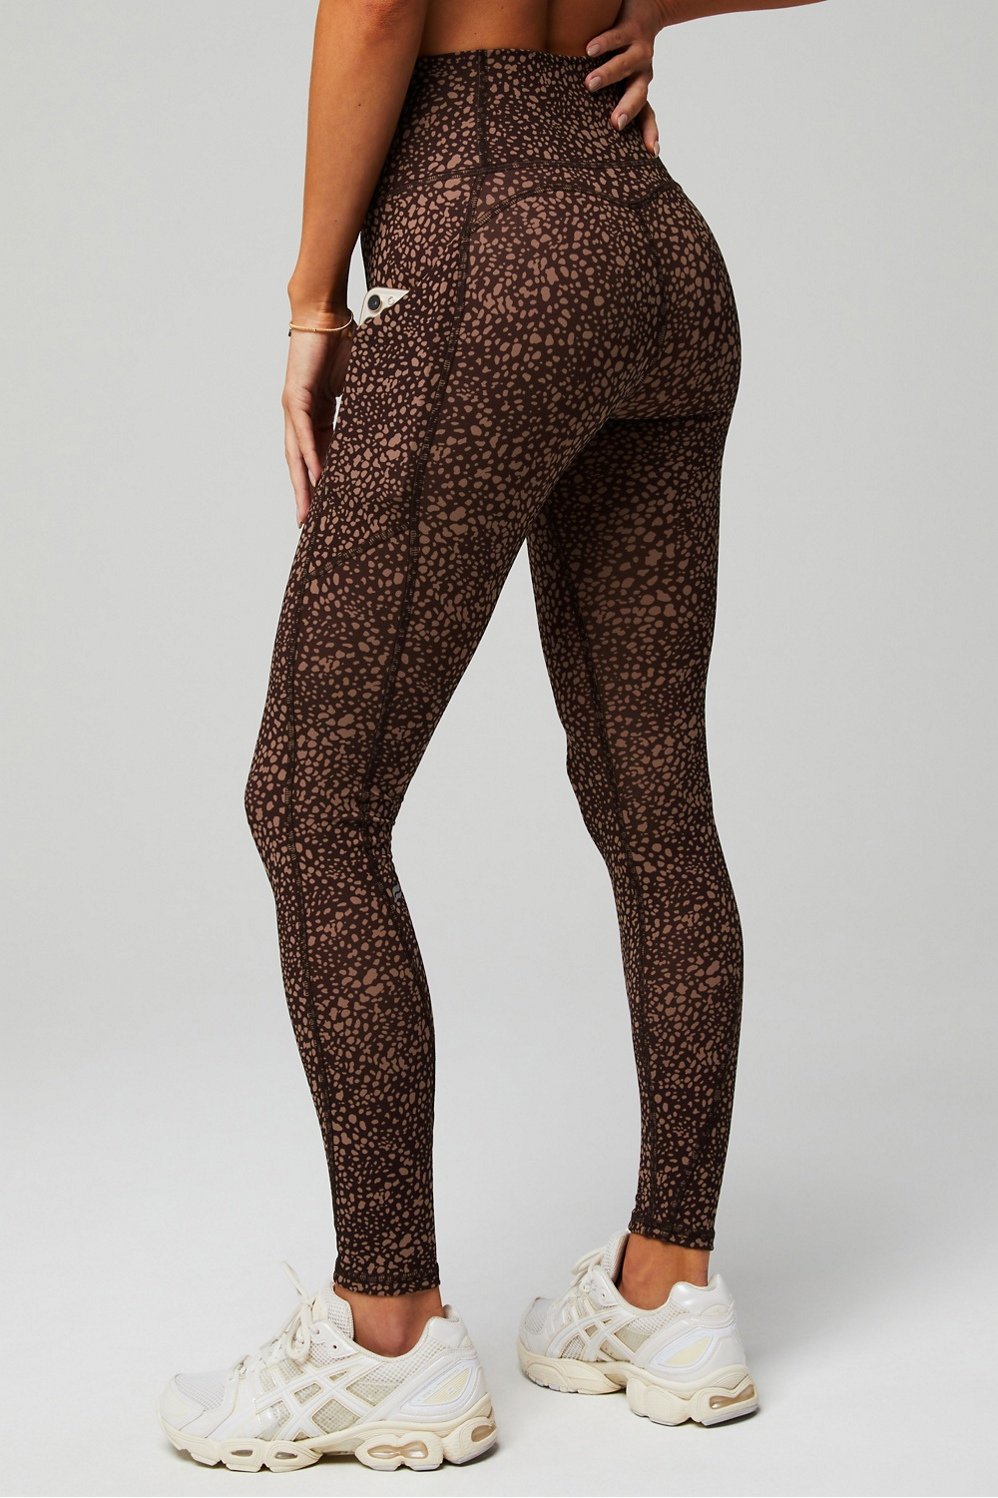 Women's Gingerbread Cheetah Go-To Pocket Legging by Pact Apparel